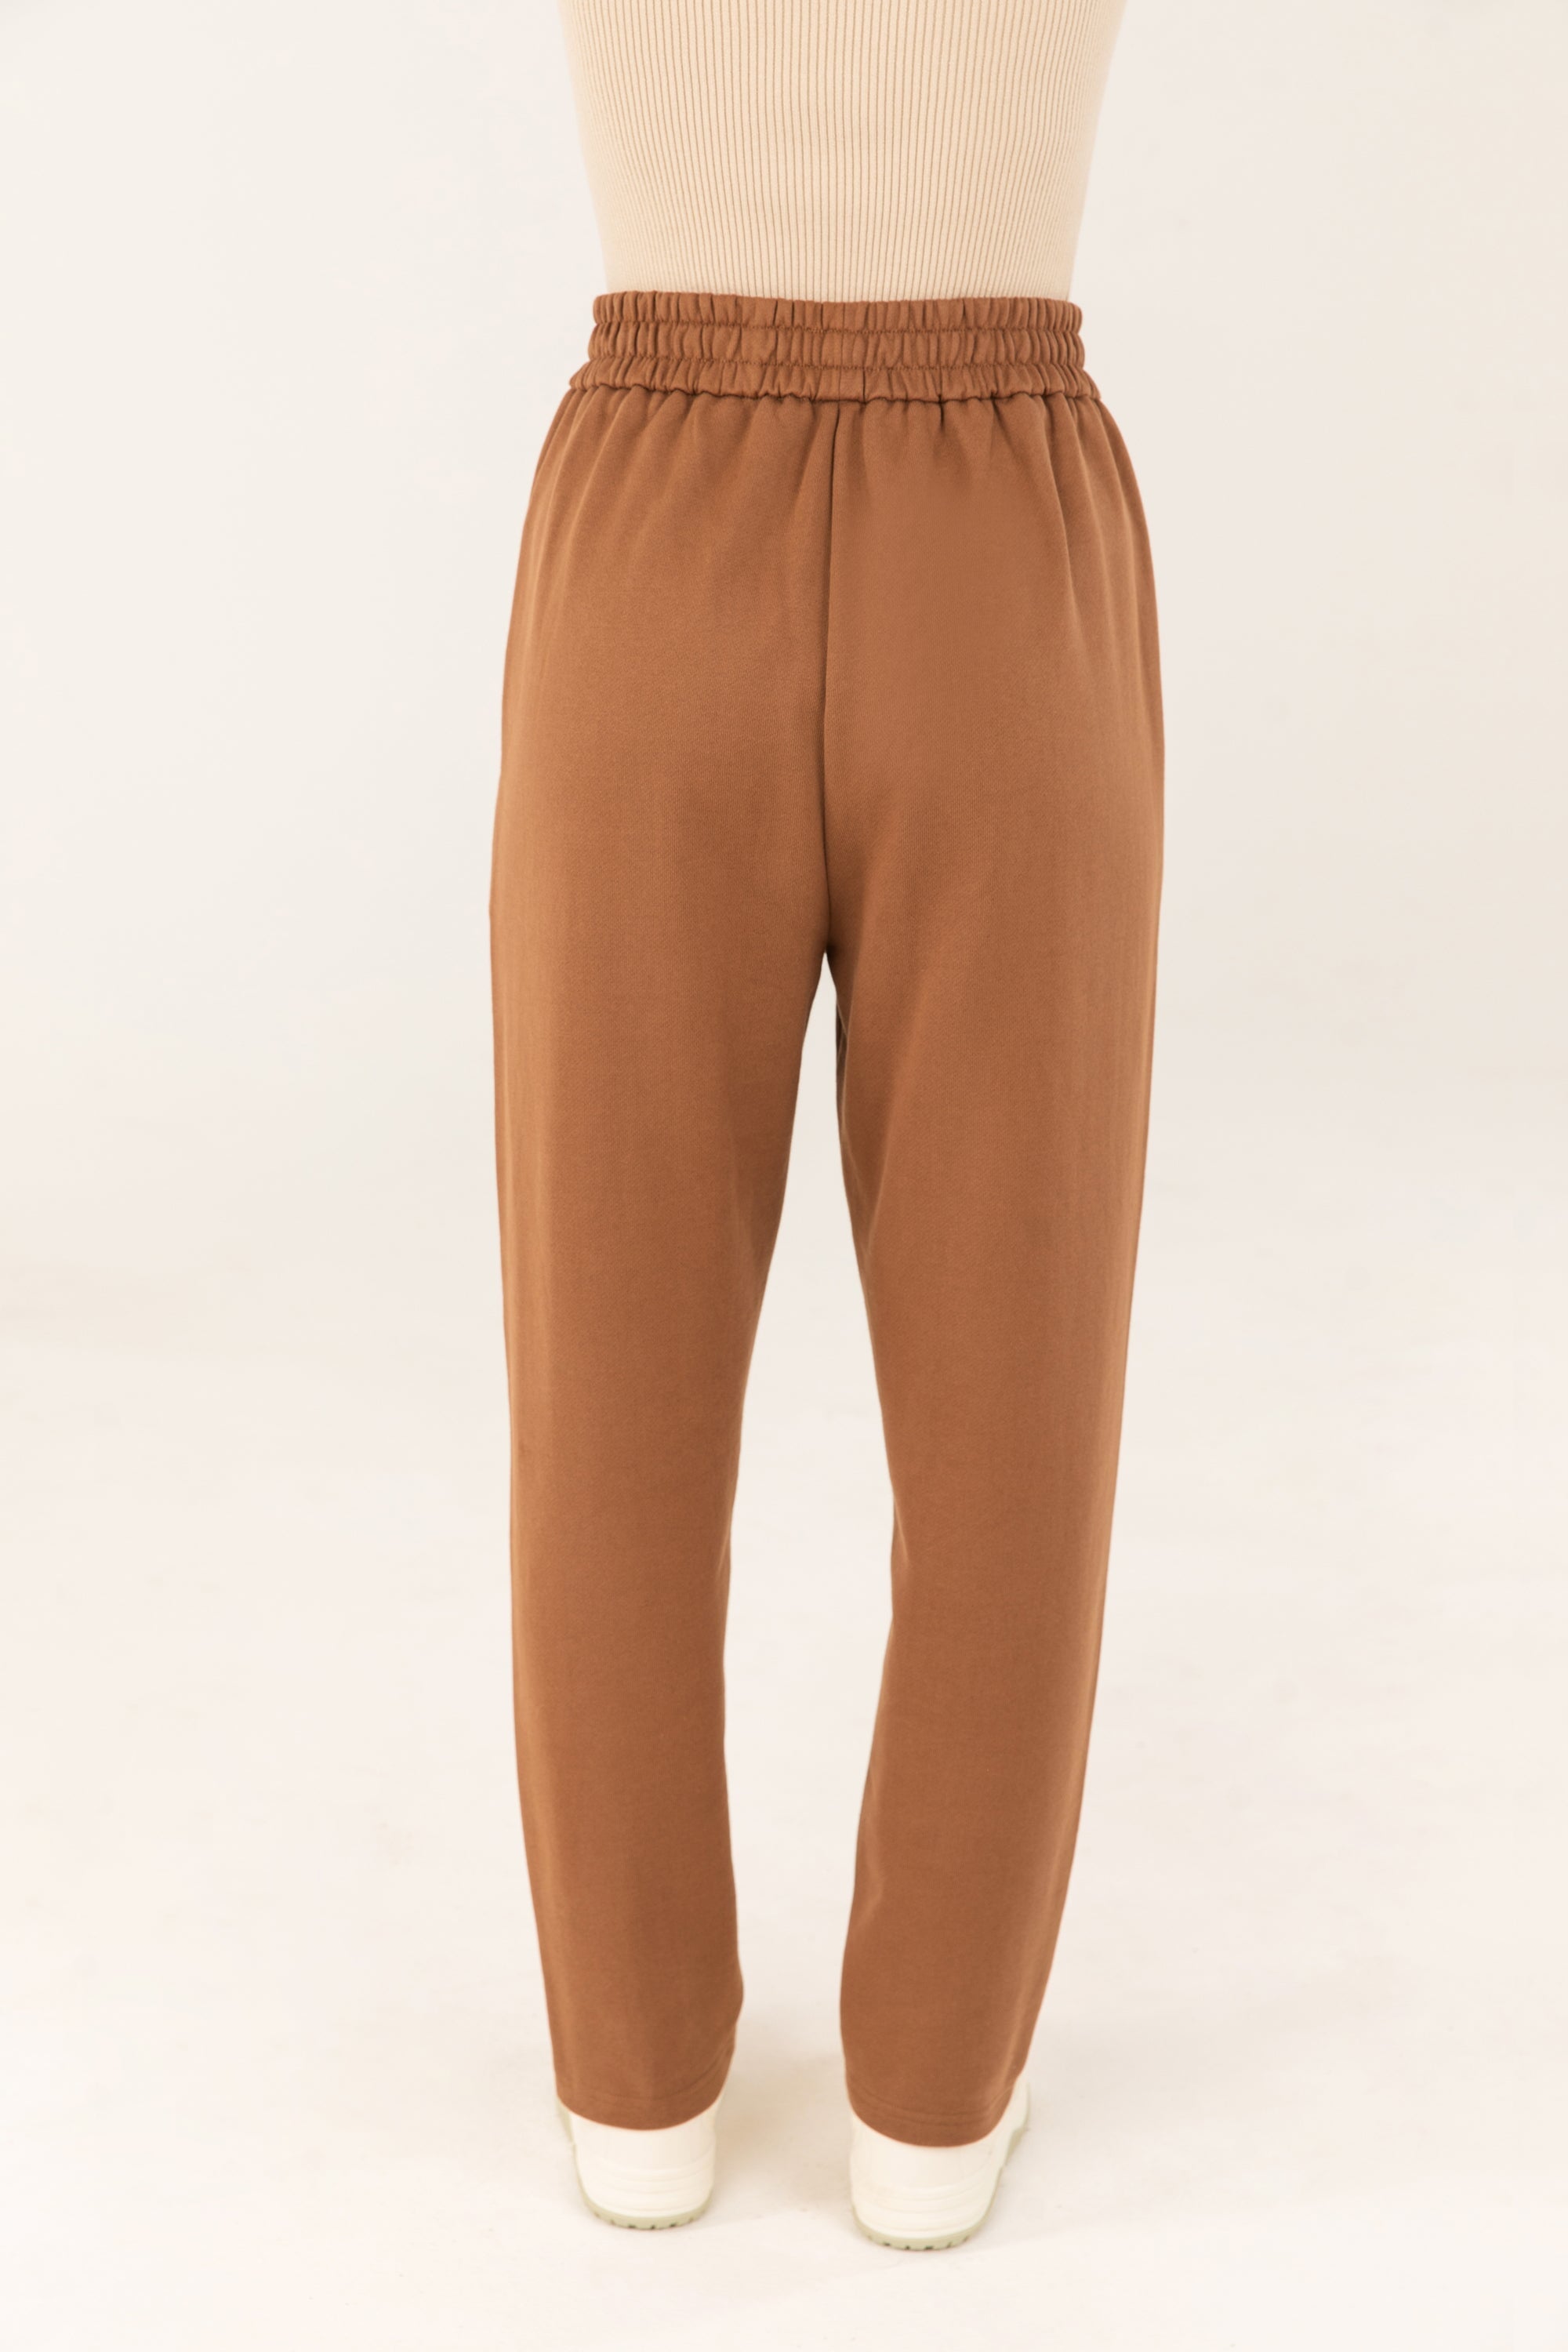 Straight Leg Seam Front Cotton Blend Sweatpants - Coffee Bean Veiled Collection 